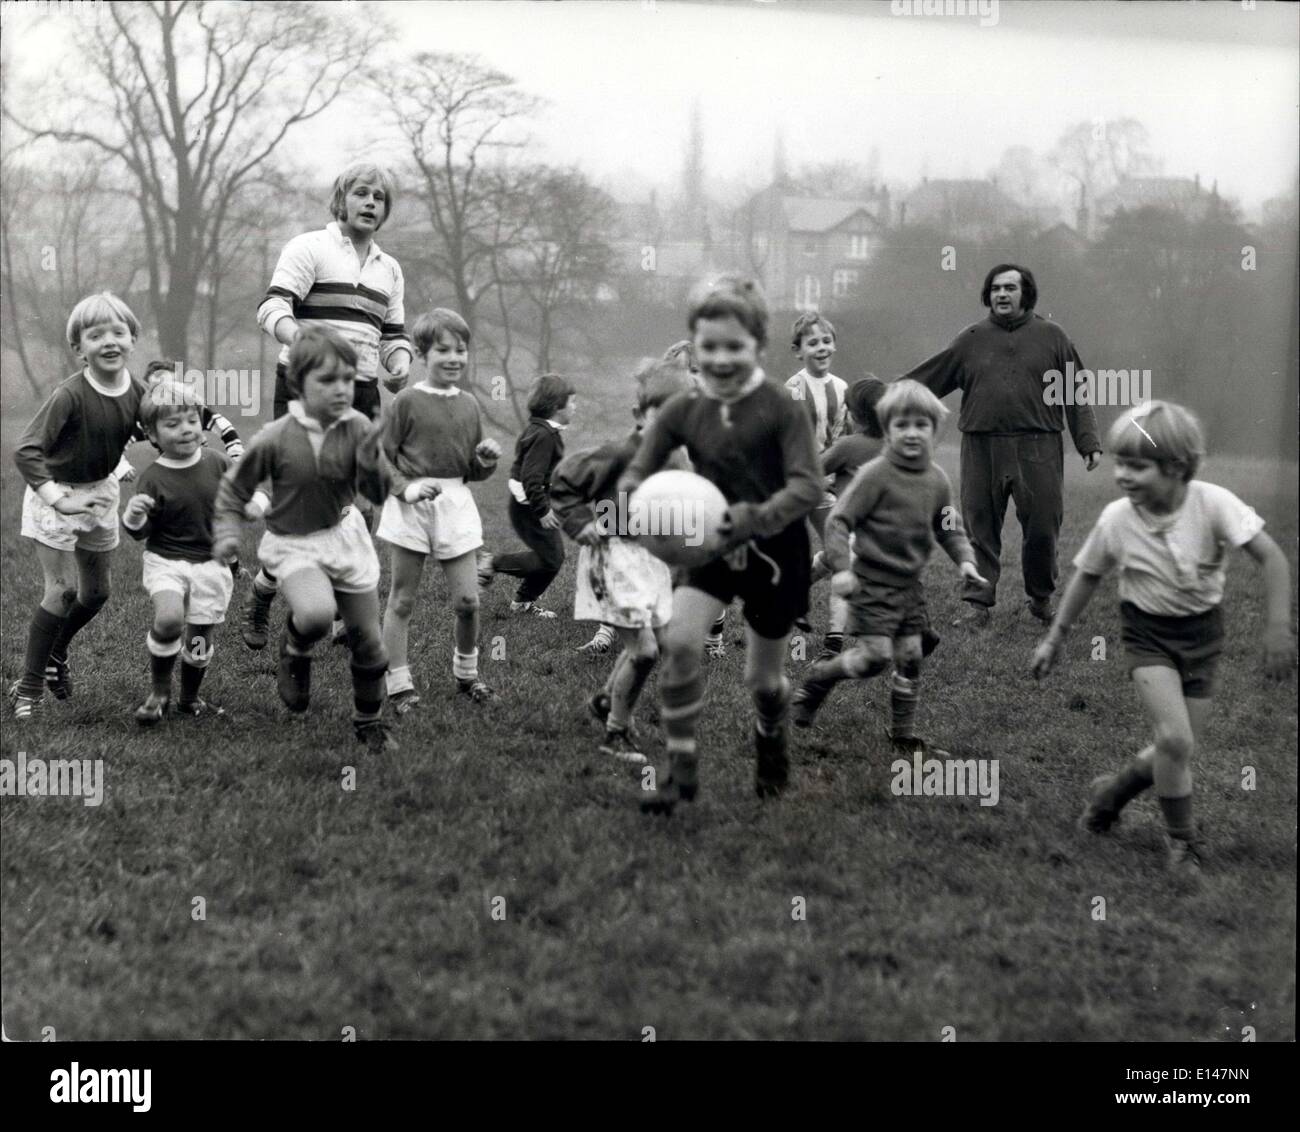 Apr. 17, 2012 - Six-year-old Andrew Brown leads the field. In the background are Huddersfield full-back Peter Fitton, left, and Stock Photo